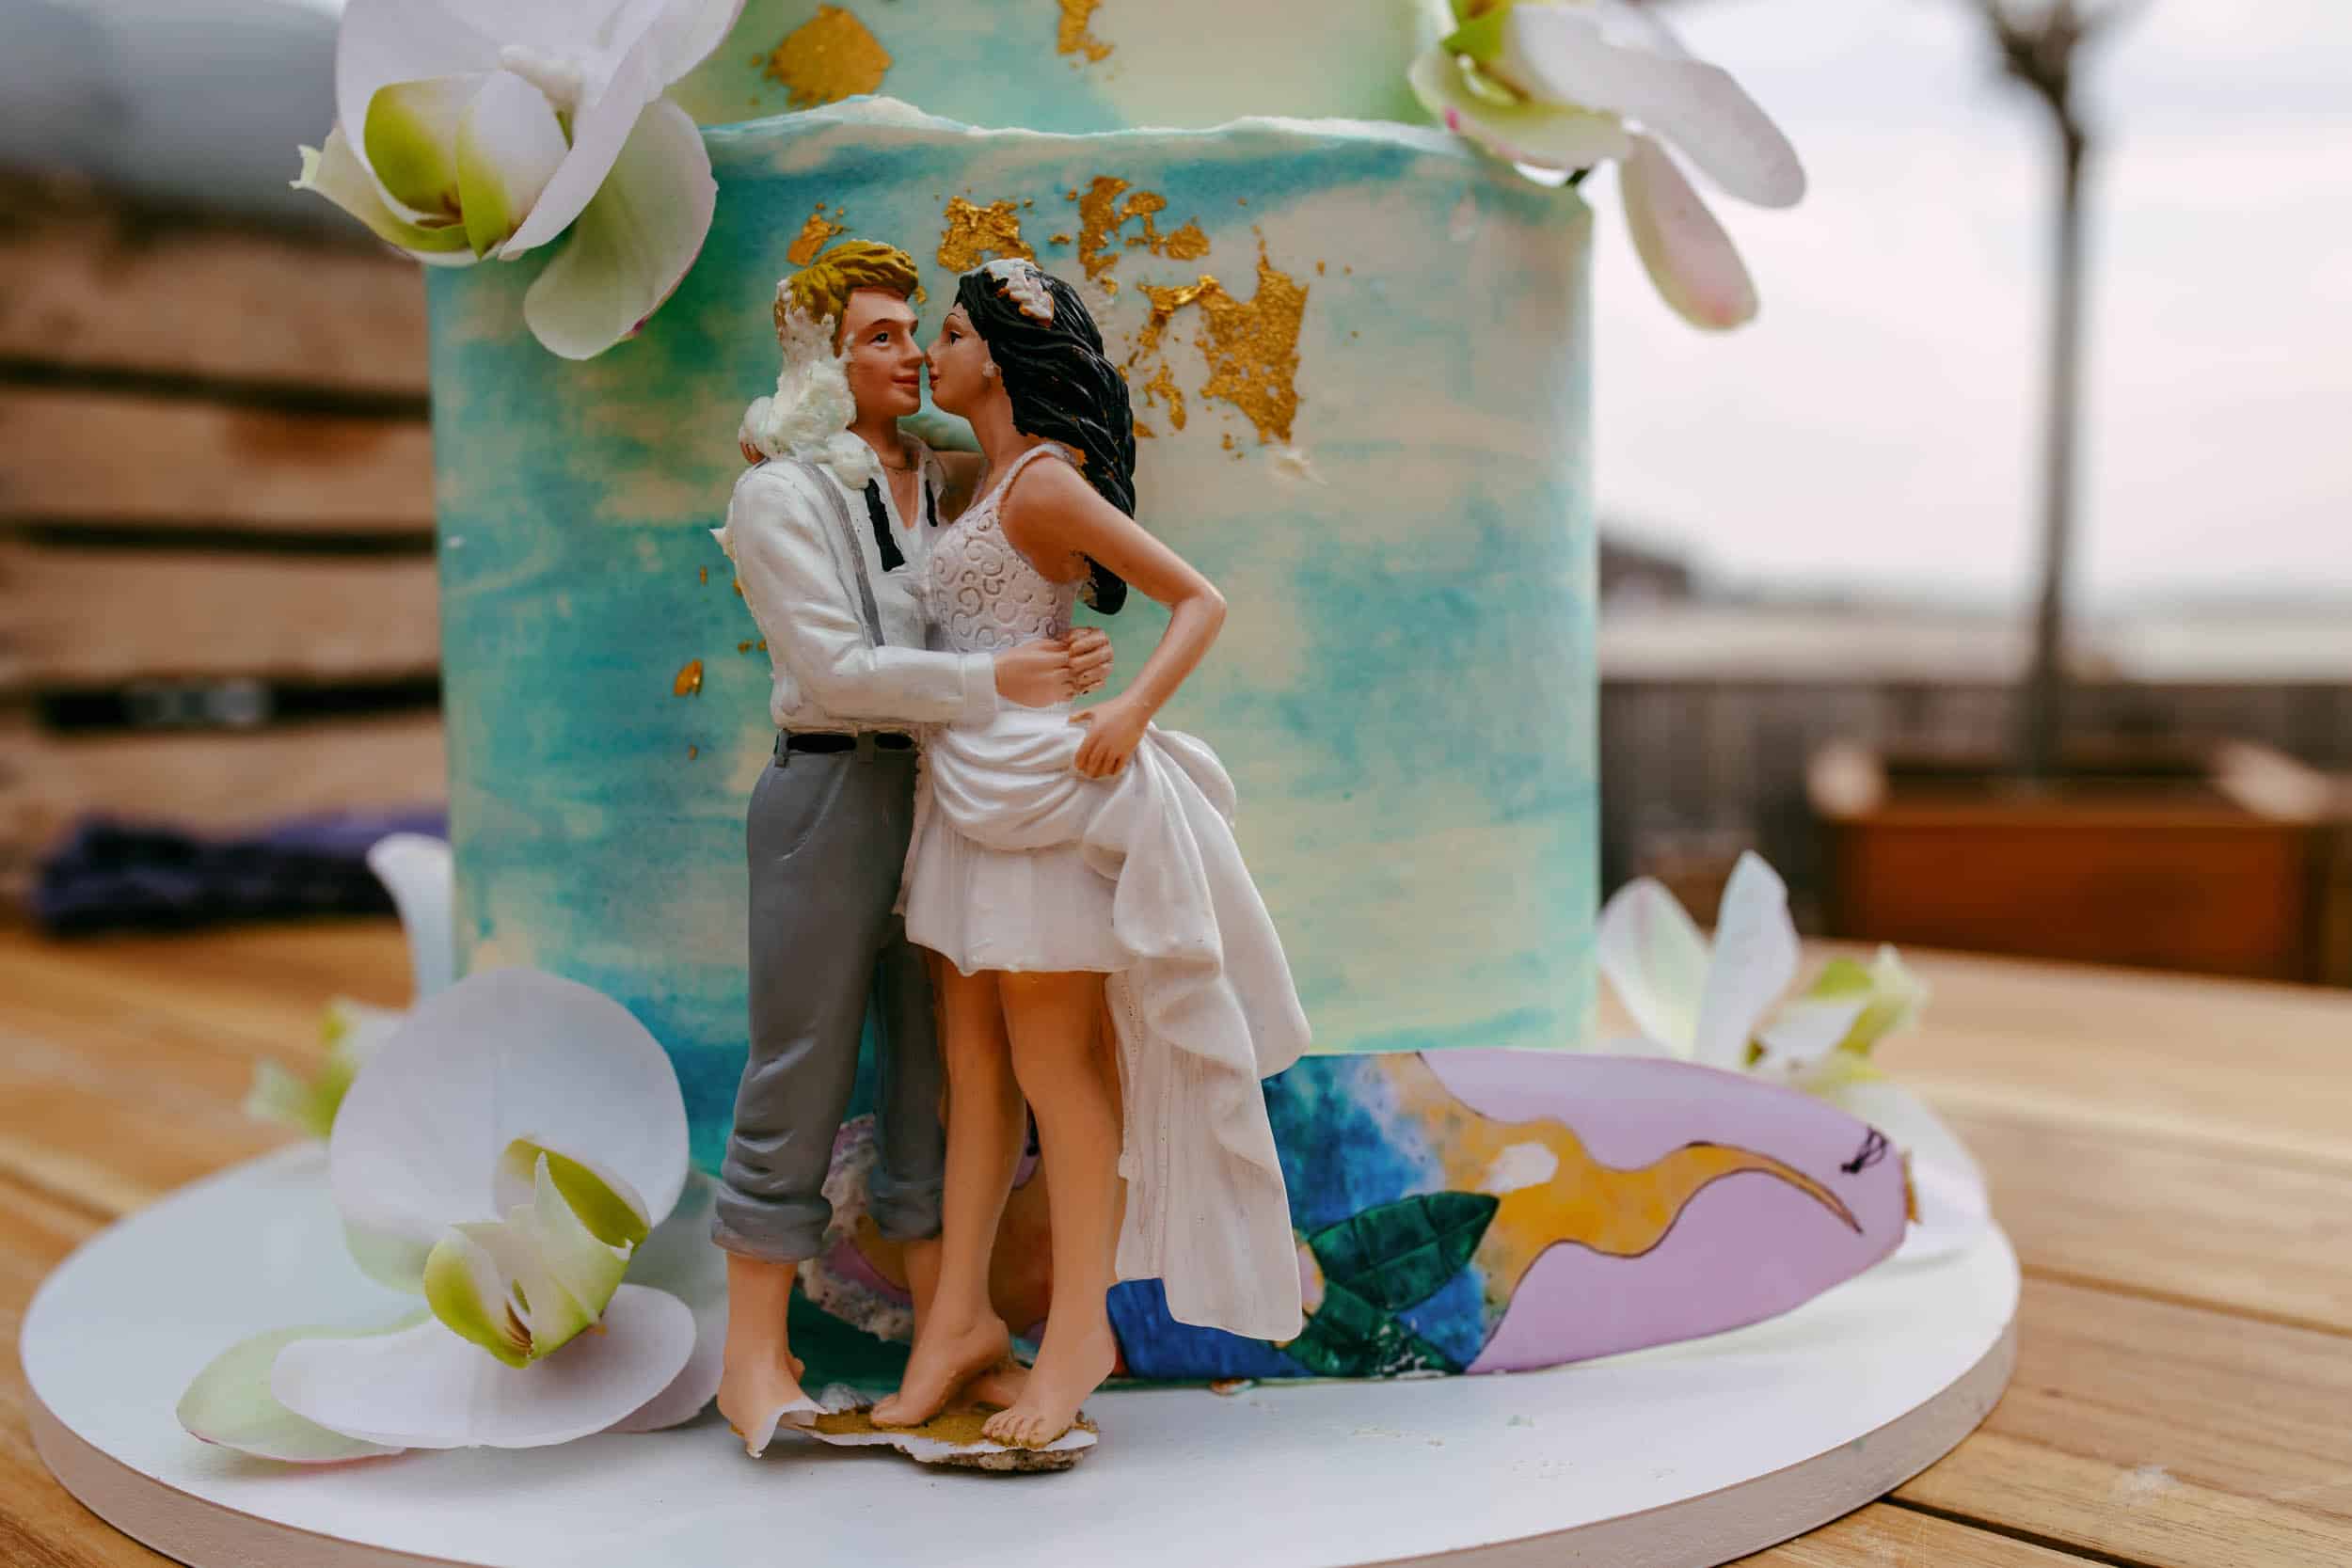 A historically inspired wedding cake with a bride and groom on top.